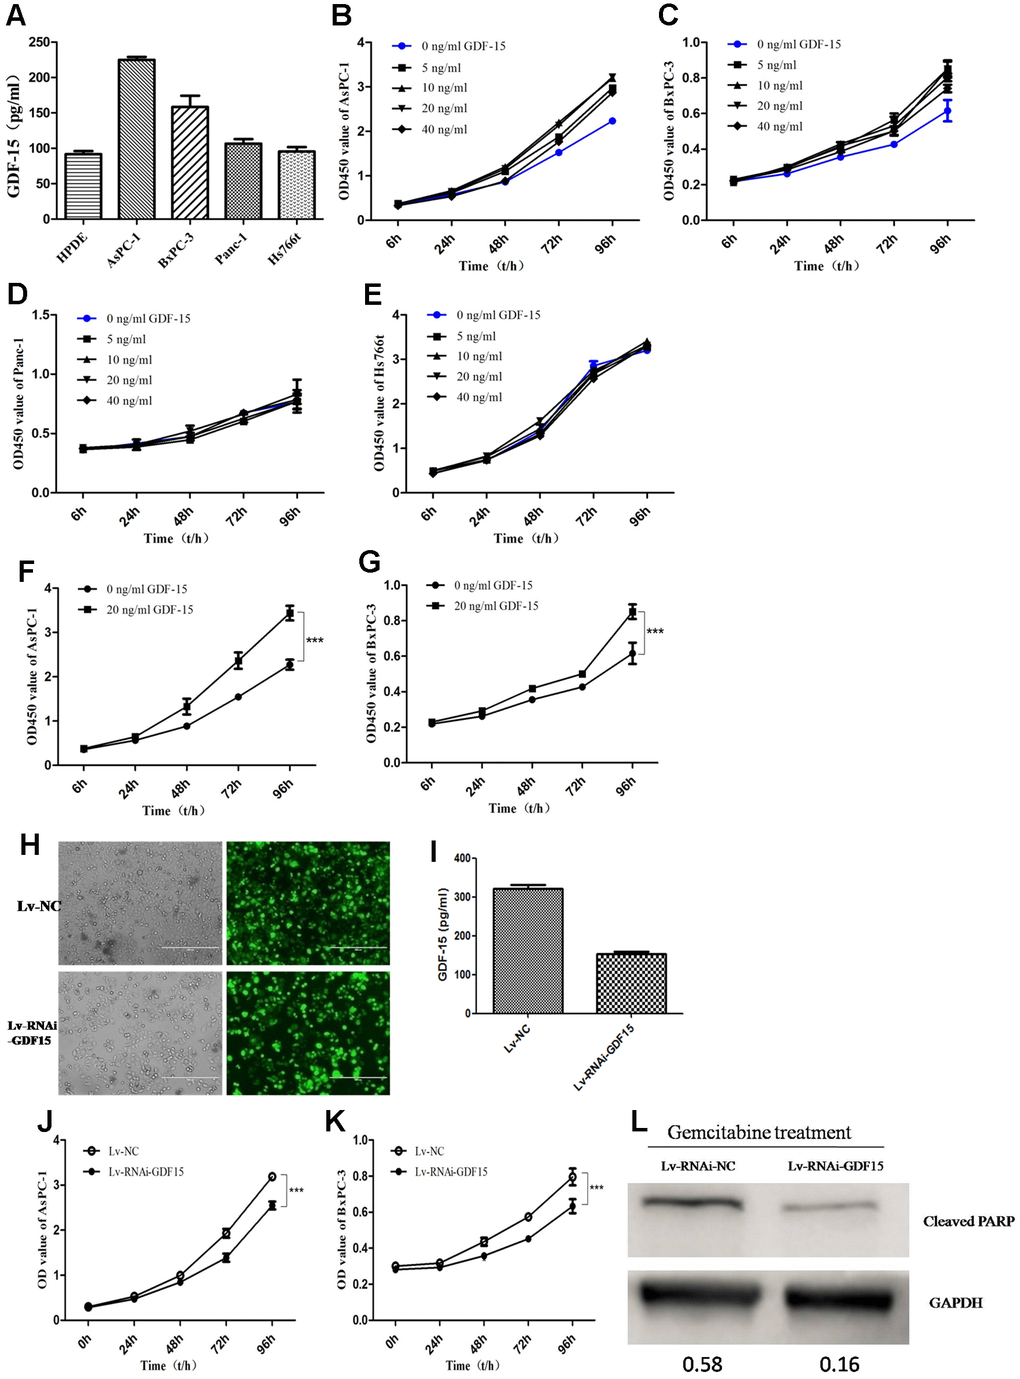 GDF-15 promotes pancreatic cancer cell proliferation in vitro and enhances the chemosensitivity of cells to gemcitabine. (A) The expression level of GDF-15 secreted by pancreatic cancer cell lines (AsPC-1, BxPC-3, Panc-1, Hs766t), was analyzed by ELISA. (B–E) Different concentrations of recombinant human GDF-15 protein, 0ng/ml, 5ng/ml, 10ng/ml, 20ng/ml, 40ng/ml, were added to the culture of the pancreatic cancer cell lines, AsPC-1, BxPC-3, Panc-1 and Hs766t. (F, G) The effect of recombinant human GDF-15 on pancreatic cancer cell lines (AsPC-1, BxPC-3) was detected by CCK-8 assay. The results are presented as the mean ± s.d. Significance was analyzed using GraphPad Prism. (H, I) The efficiency of lentivirus infection was detected by fluorescence microscope in AsPC-1 cells, and the results from ELISA assay indicated that GDF-15 expression was downregulated significantly. (J, K) The effect of GDF-15 knockdown on the proliferation of AsPC-1 and BxPC-3 cells was detected by CCK-8 assay. (L) WB assay for cleaved PARP in Lv-RNAi-NC- and Lv-RNAi-GDF-15-infected AsPC-1 cells after gemcitabine (20μM) for 48h using GAPDH as a loading control. ***P